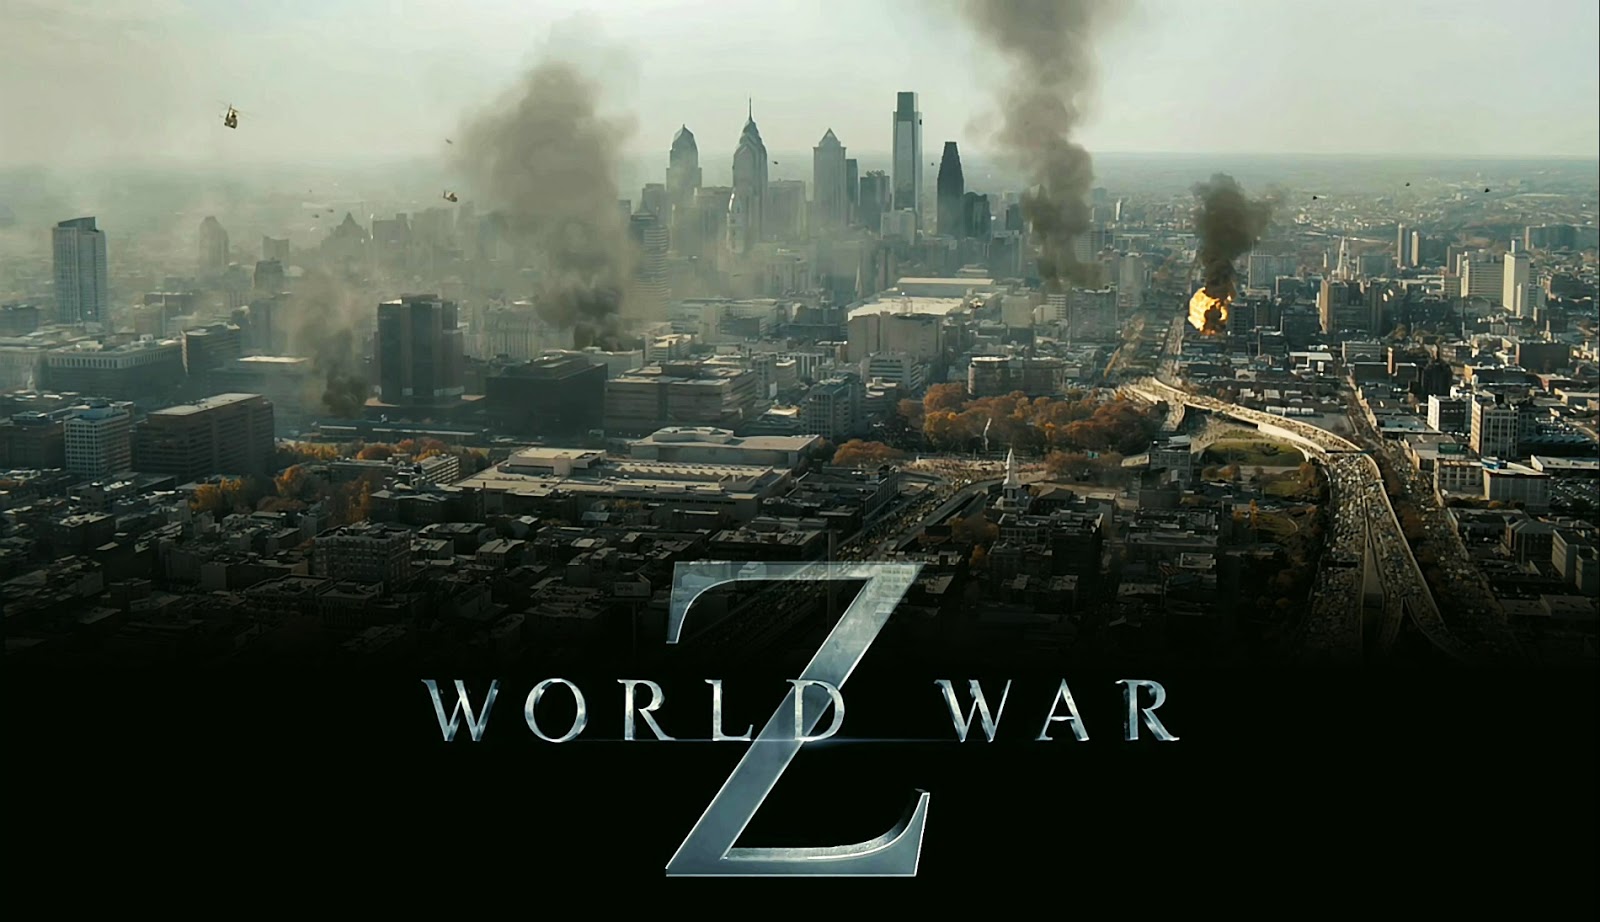 World War Z Movie HD Wallpaper And Posters